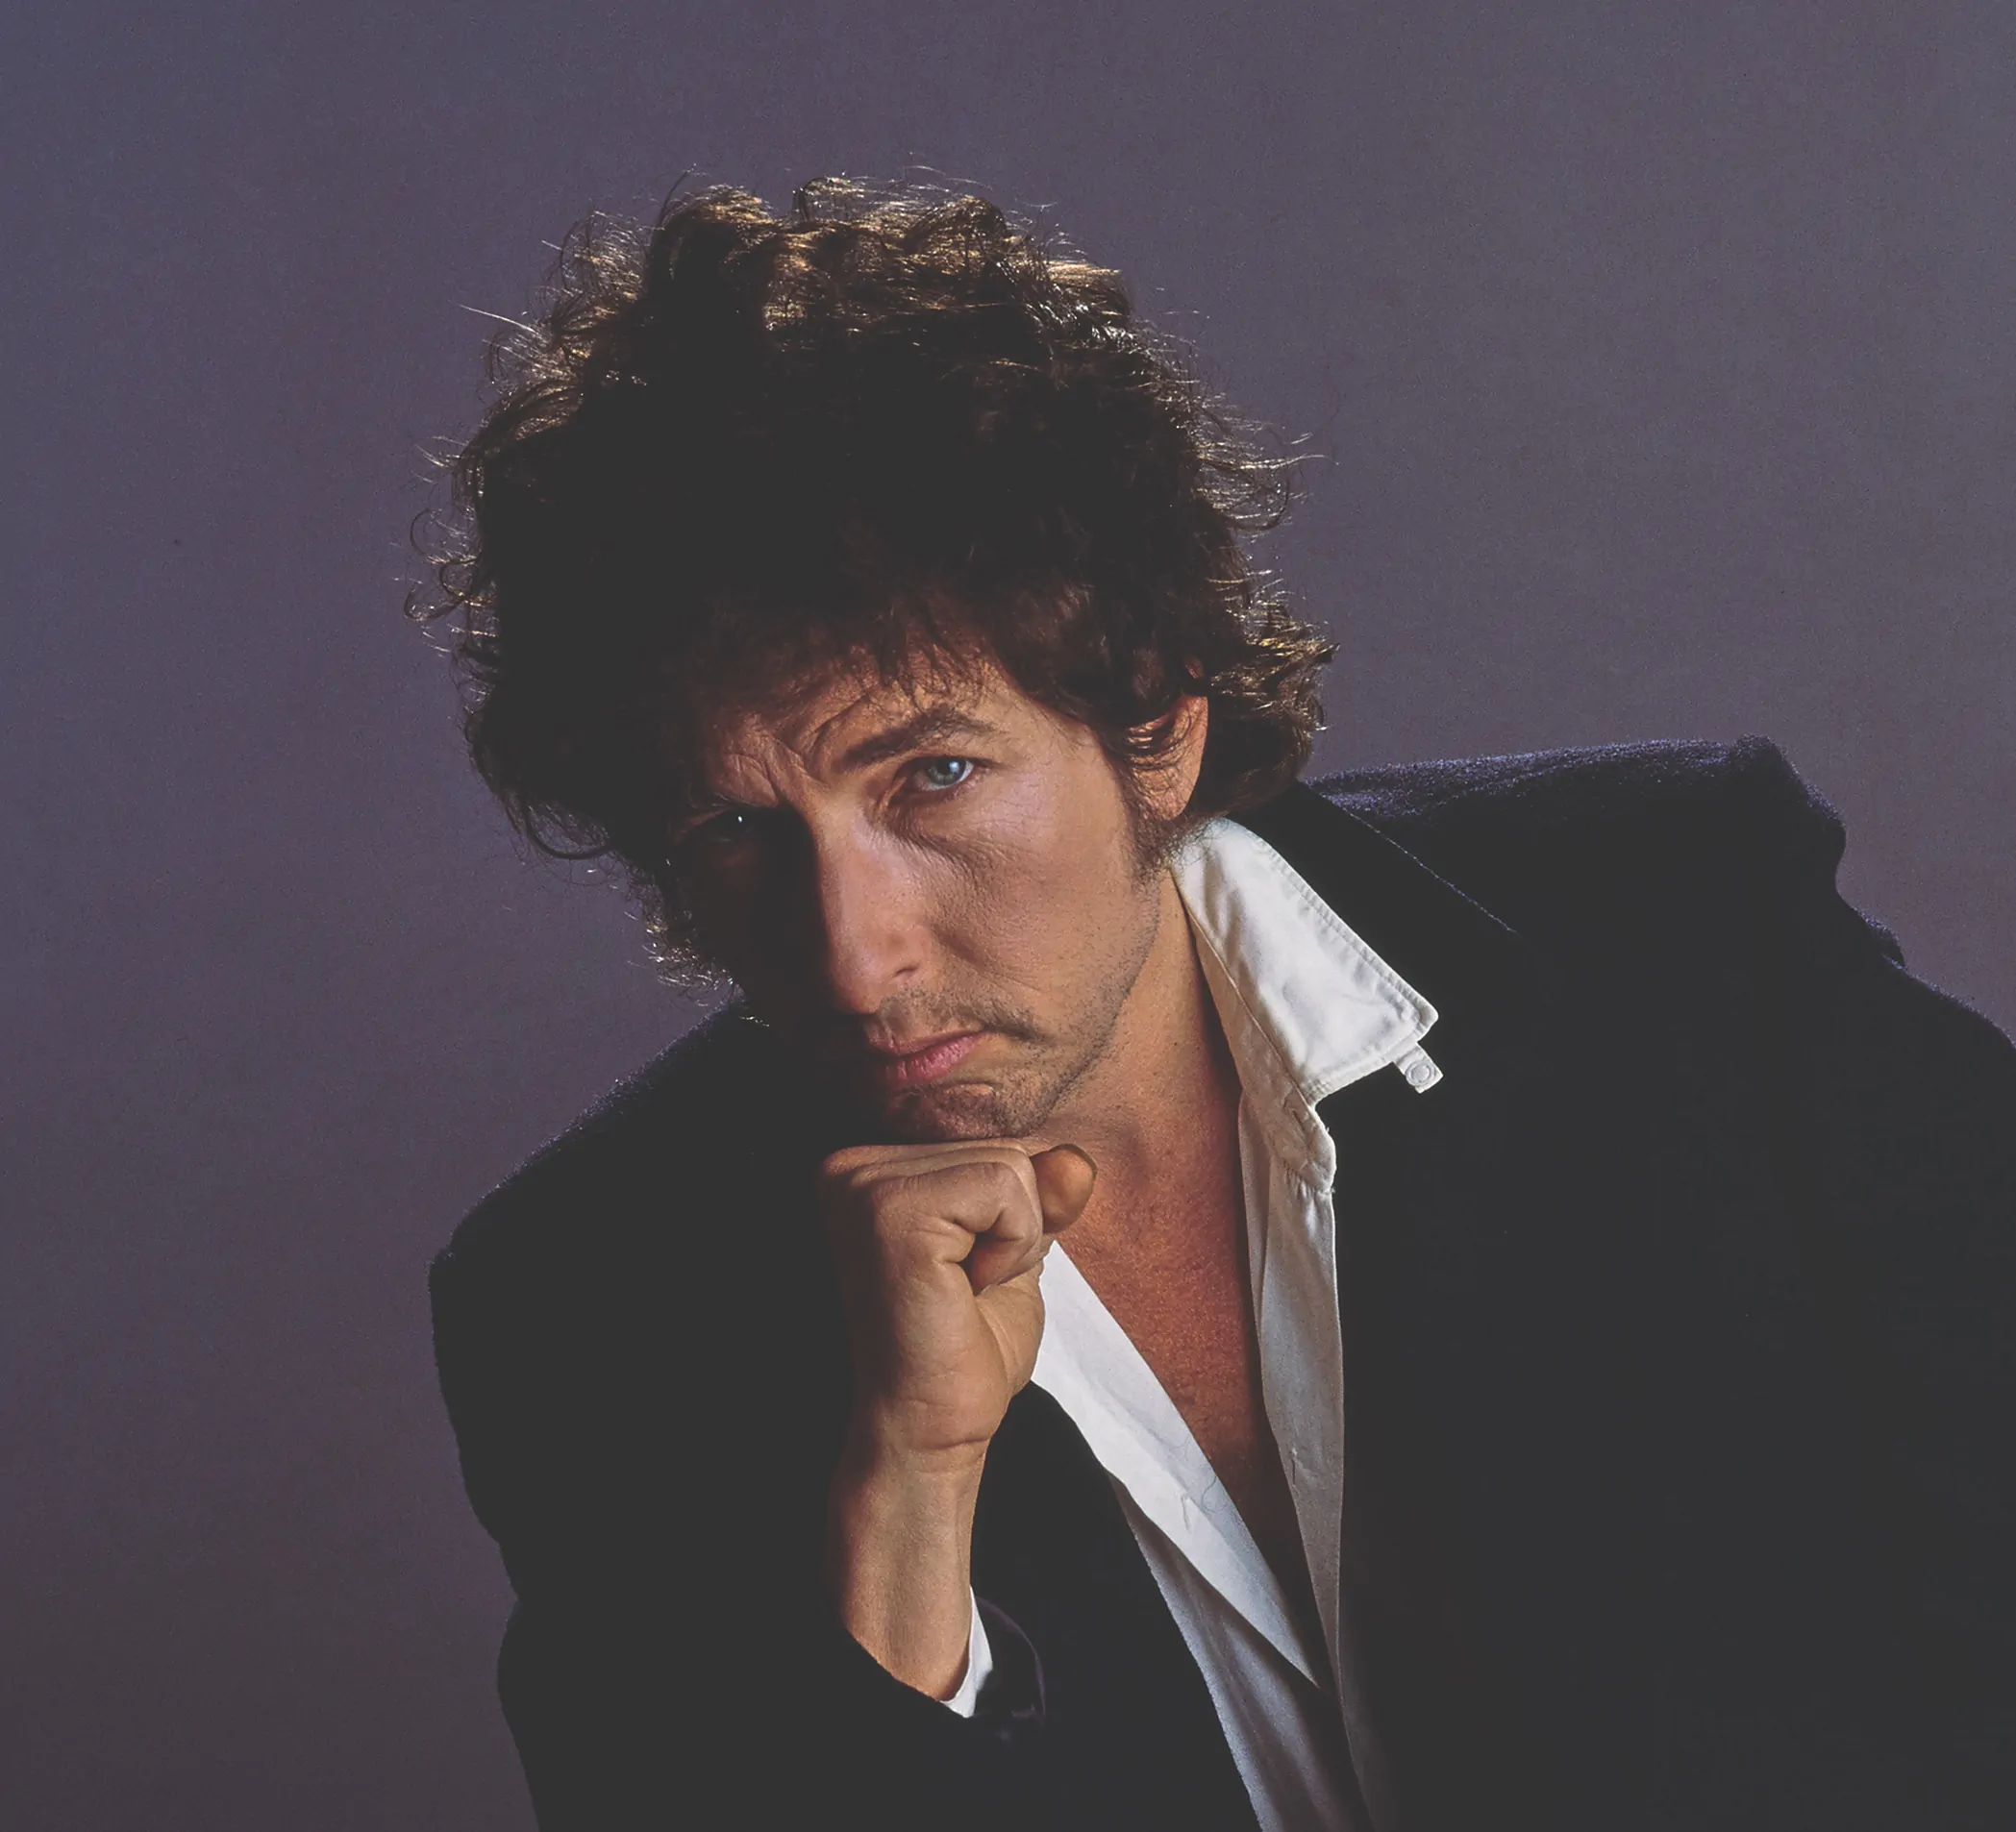 BOB DYLAN – Springtime in New York: The Bootleg Series, Vol. 16 (1980-1985) to be released on Friday, September 17th